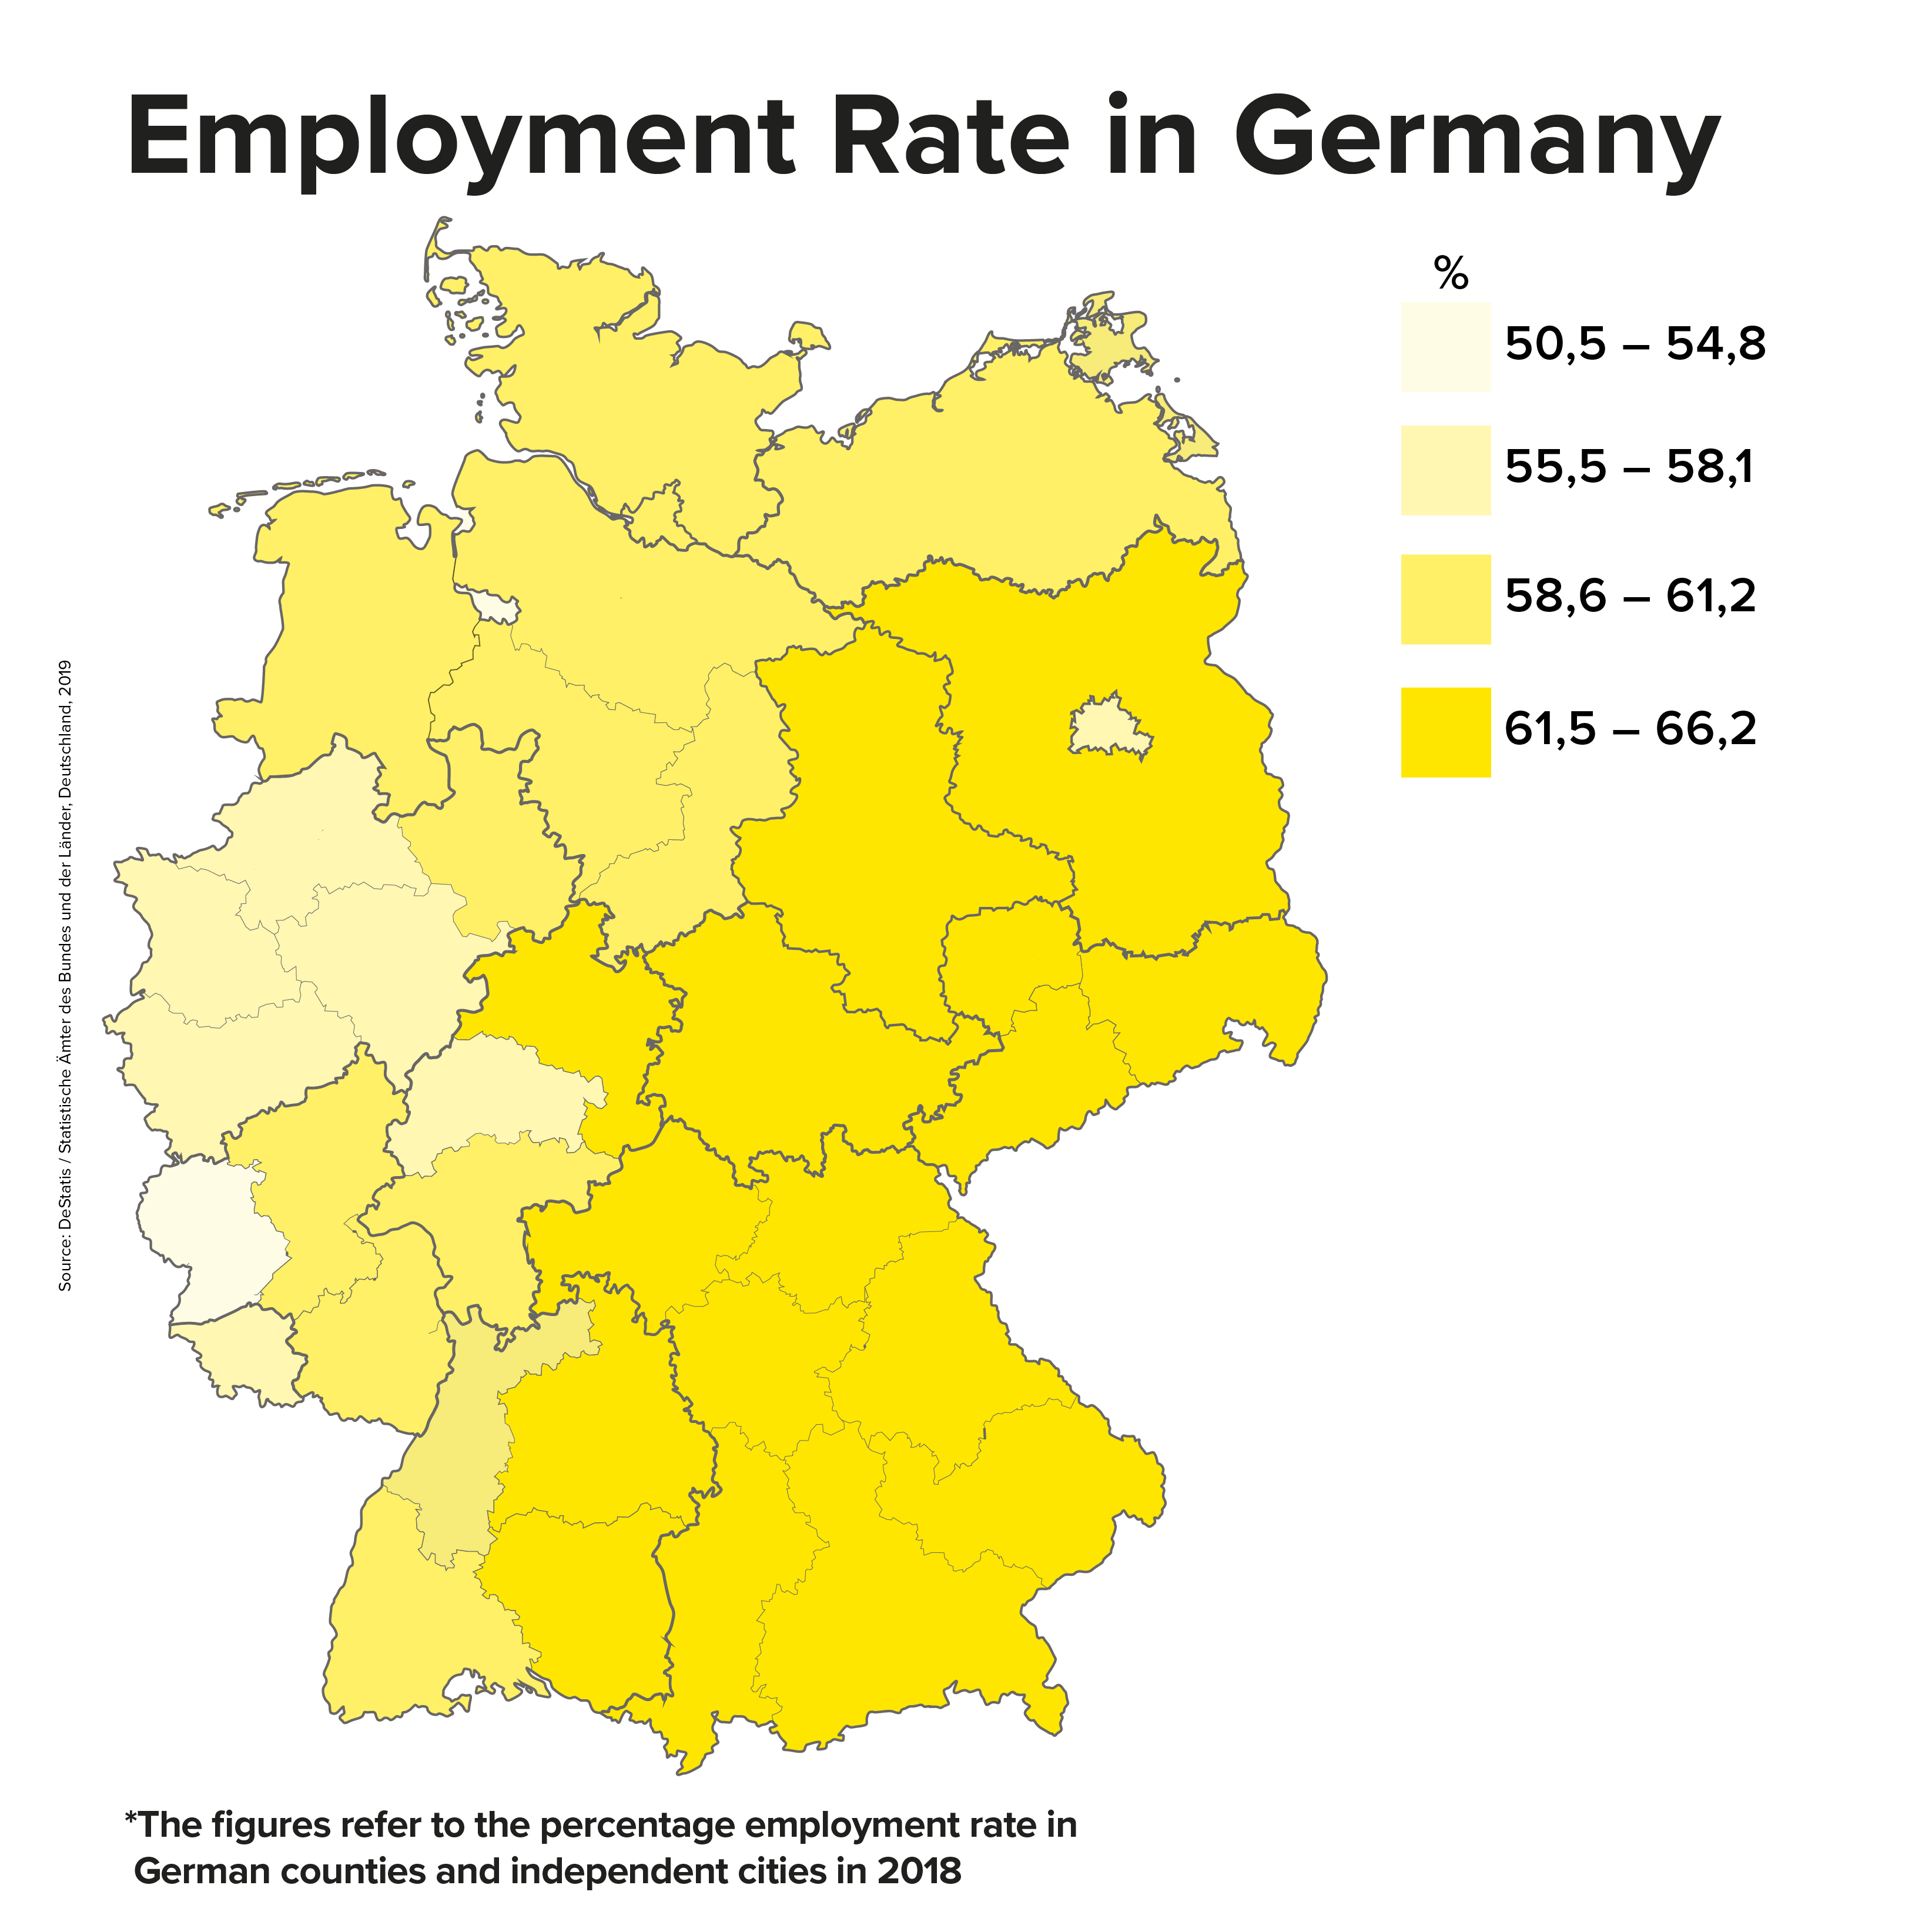 Germany: employment rate